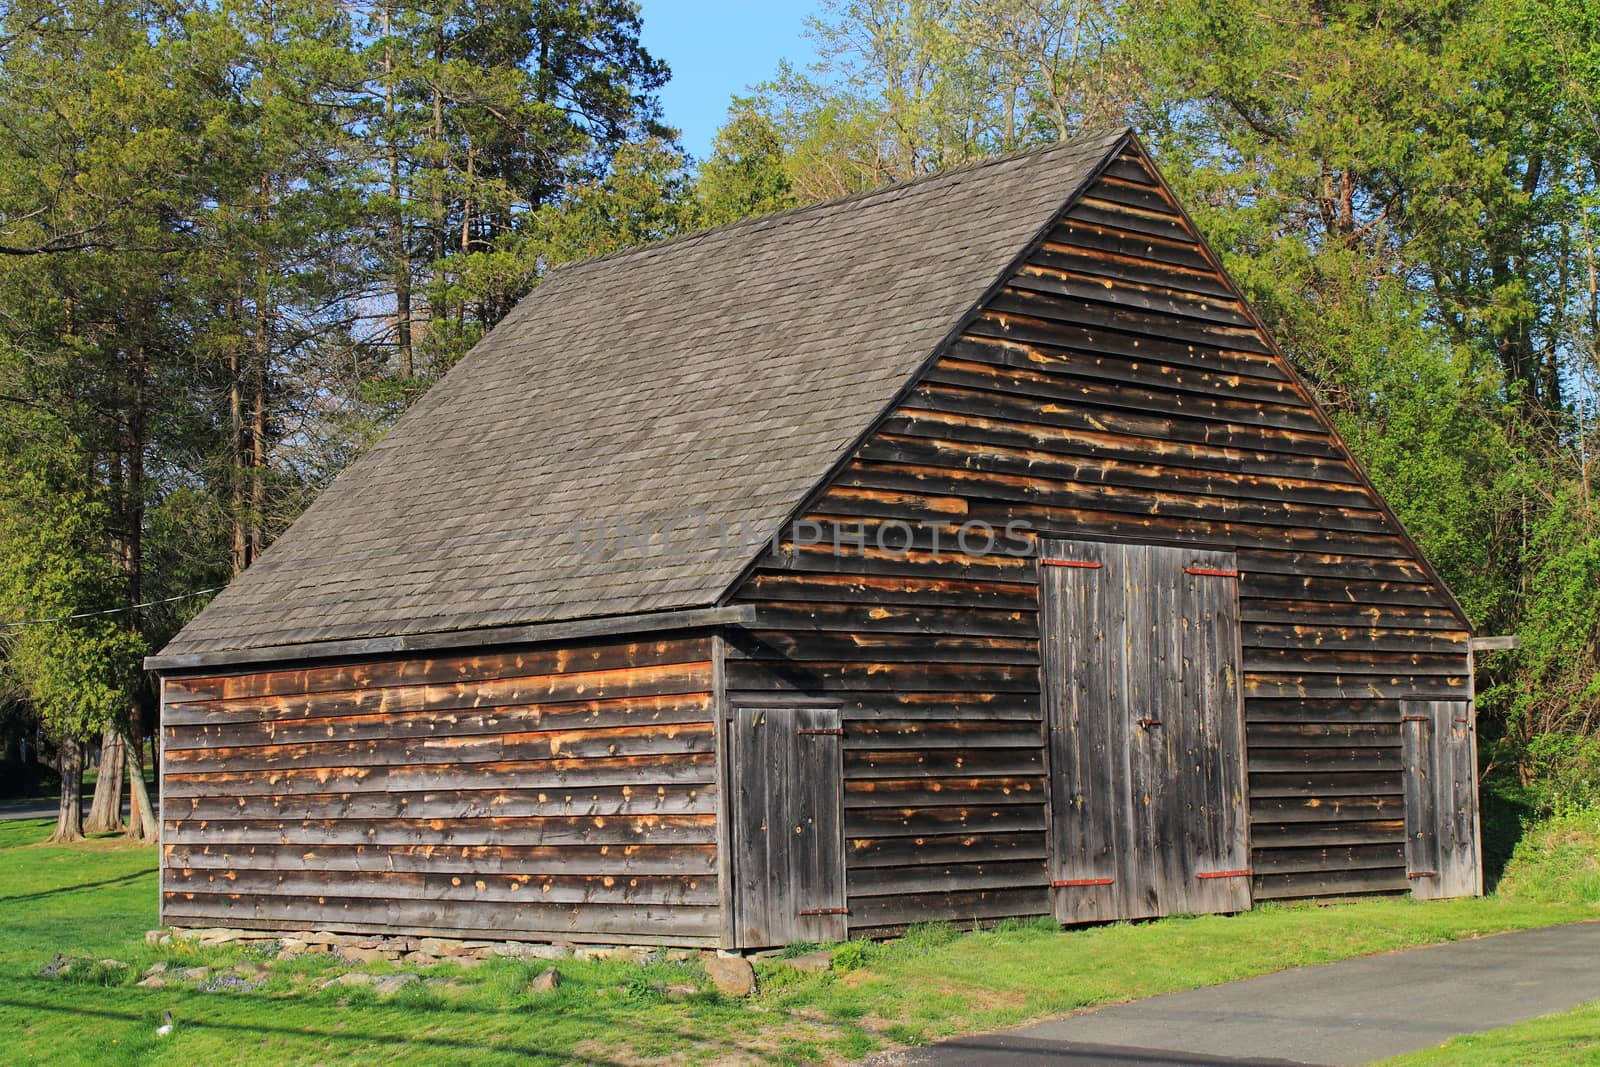 Barn - Farm building, with old weathered wooden planks